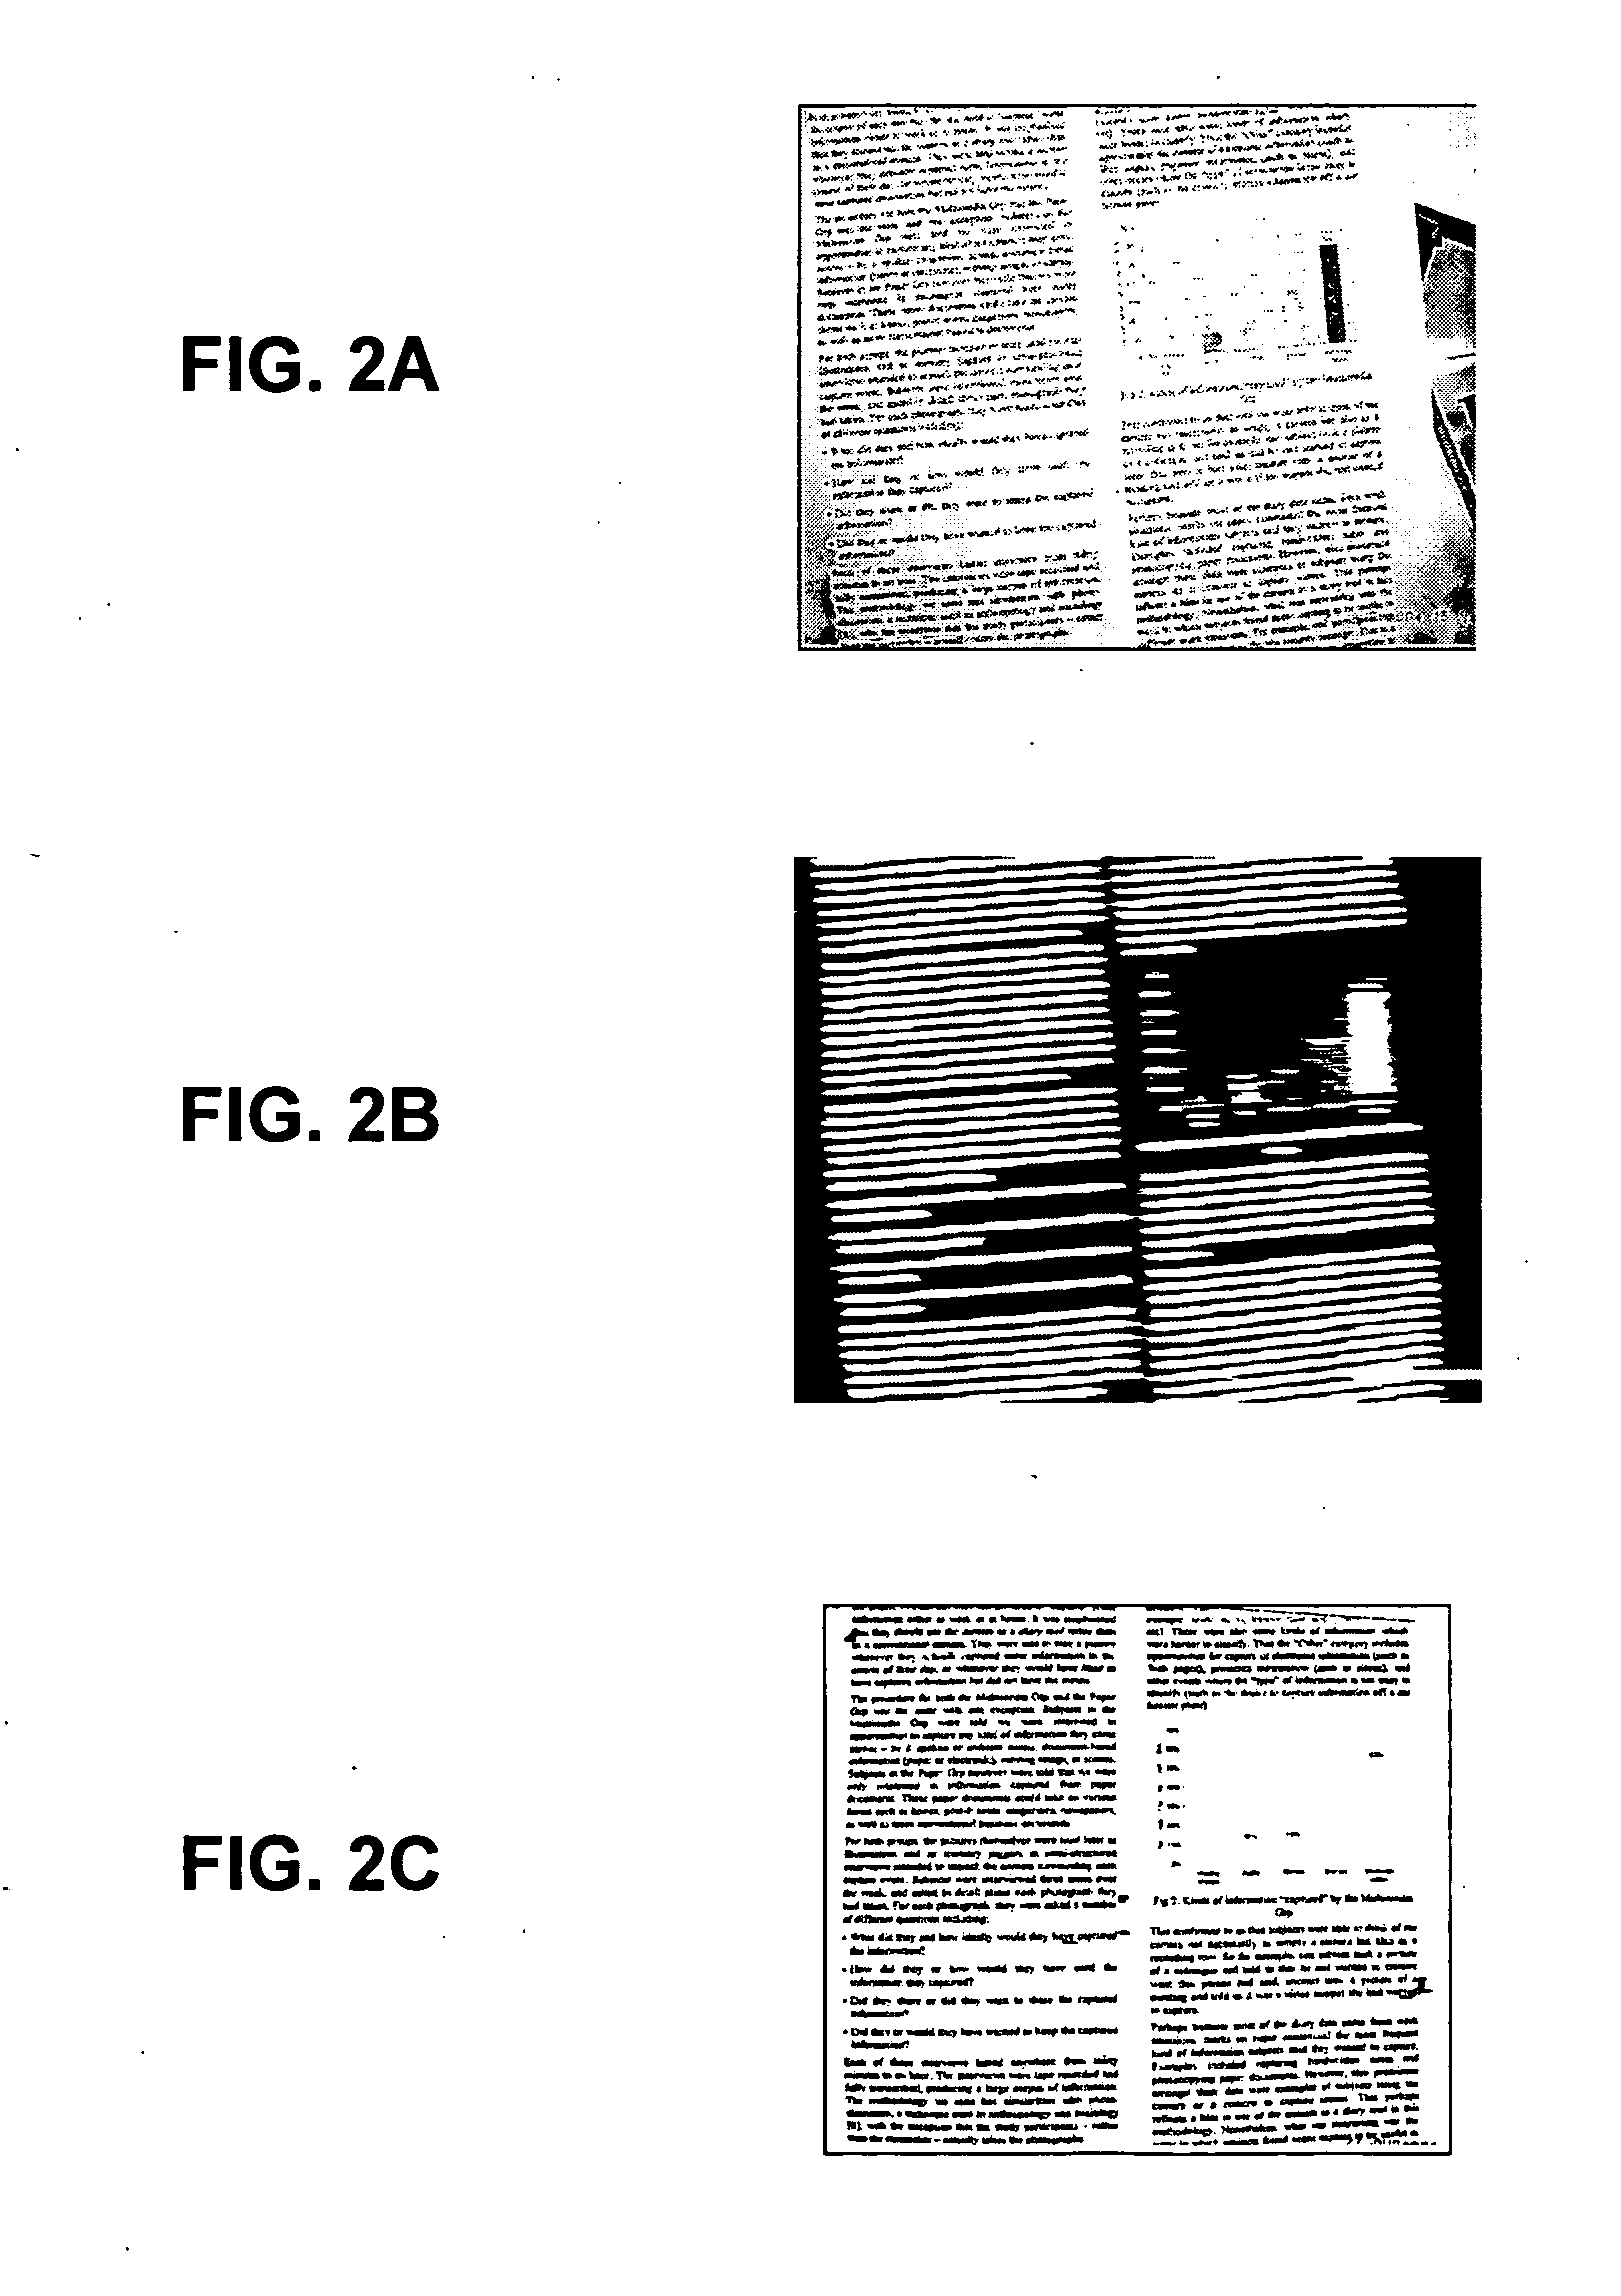 Semantic classification and enhancement processing of images for printing applications